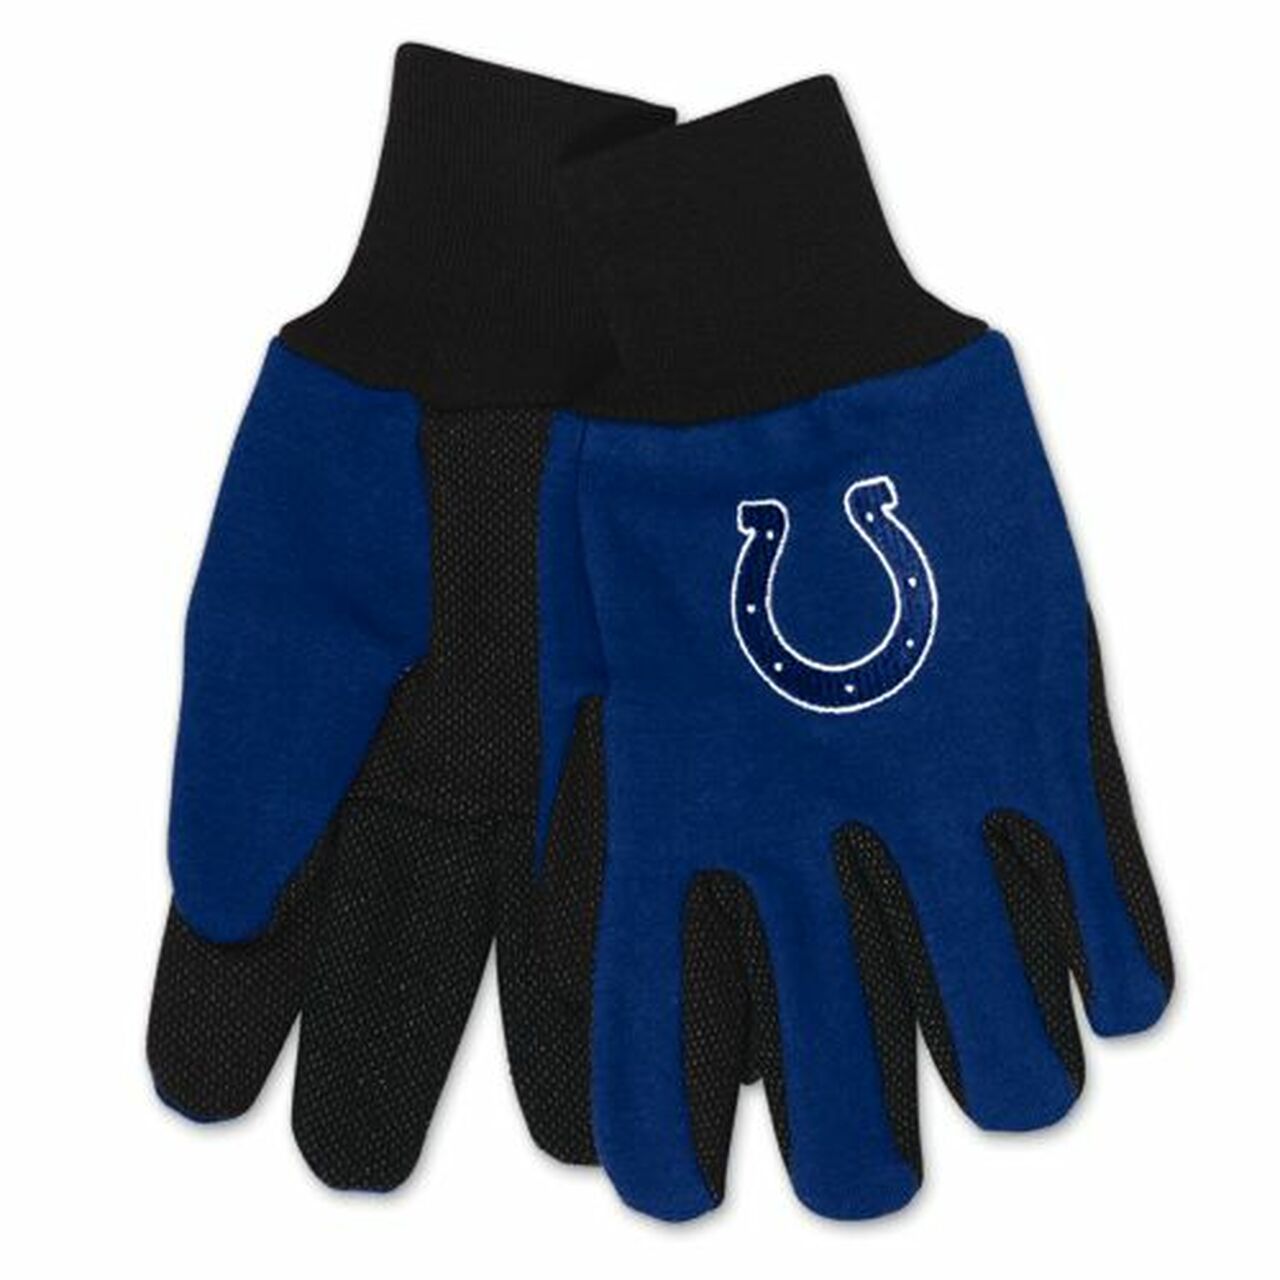 Indianapolis Colts Two Tone Adult Size Gloves by Wincraft